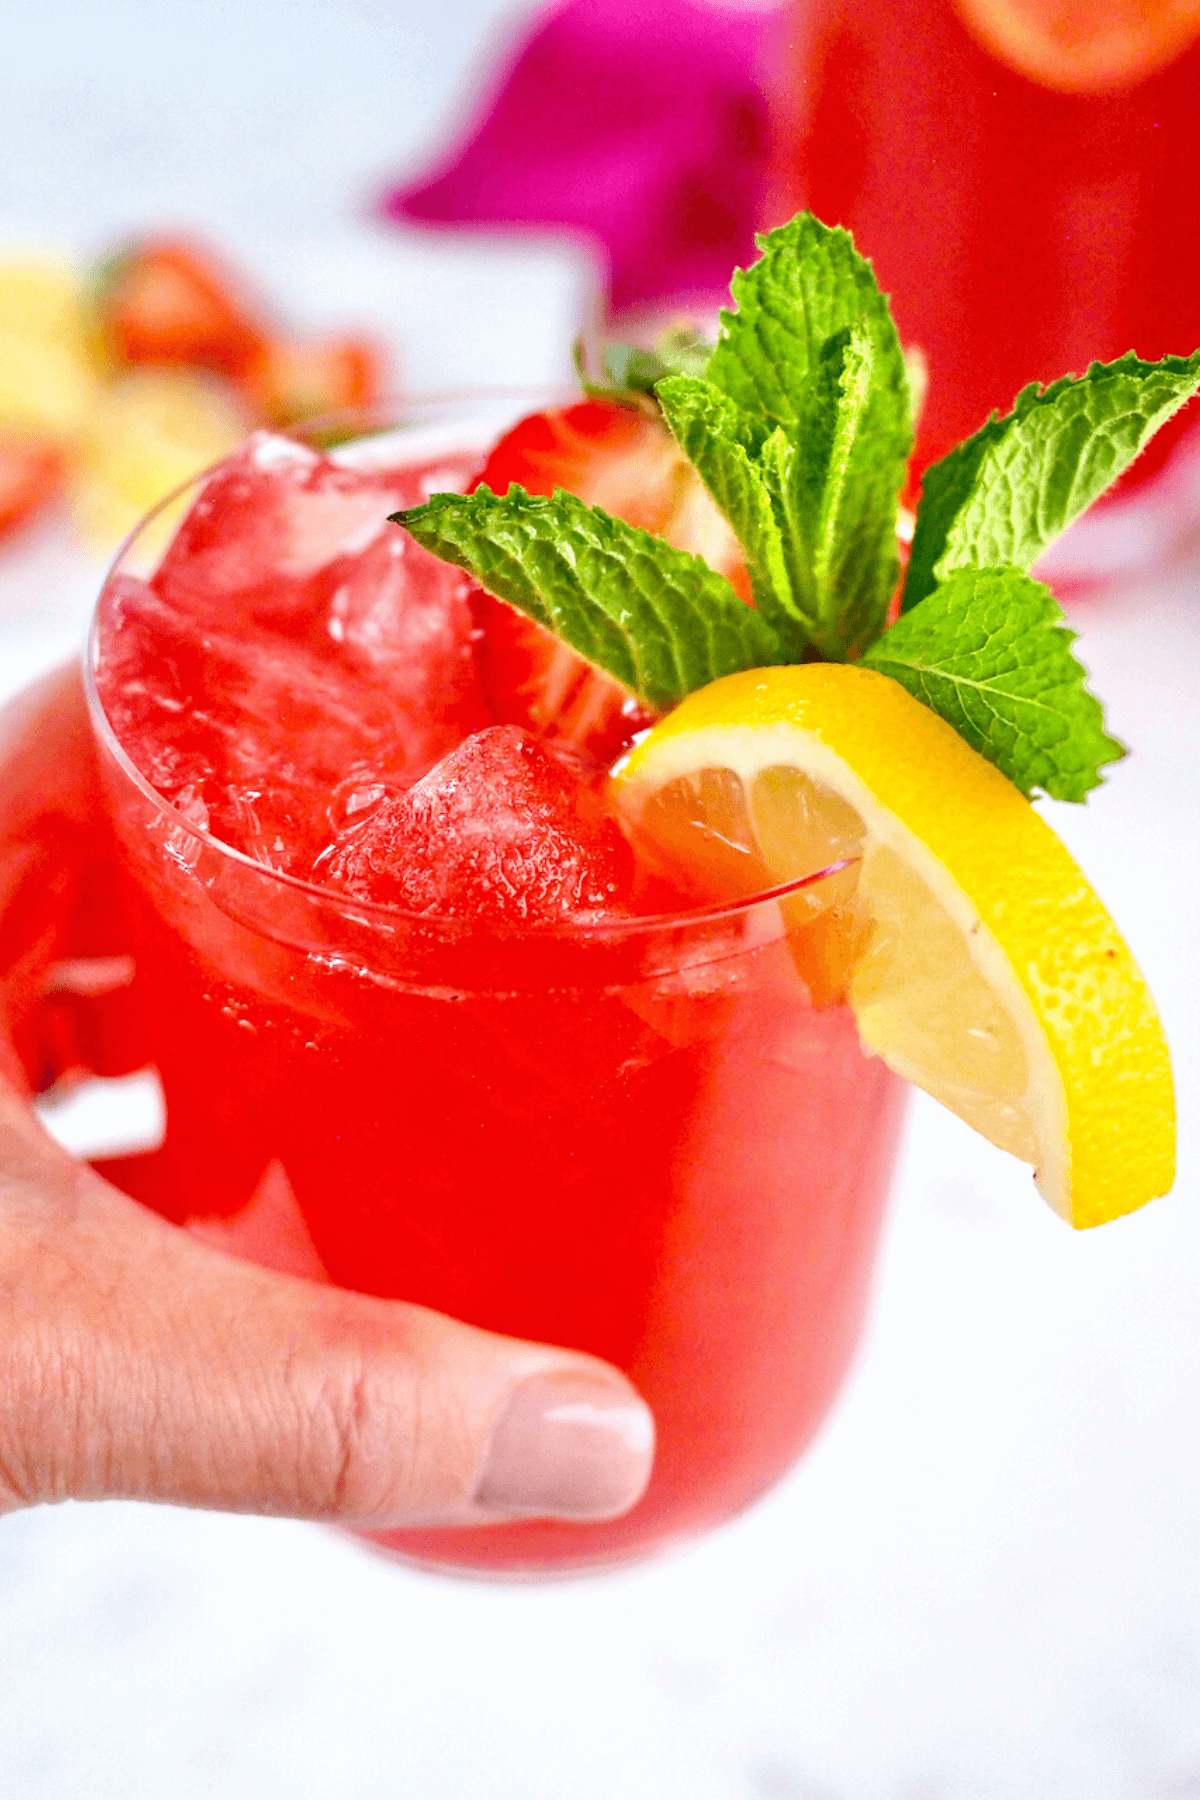 Hand holding glass filled with bright pink lemonade vodka drinks, garnished with lemon, strawberry and mint.